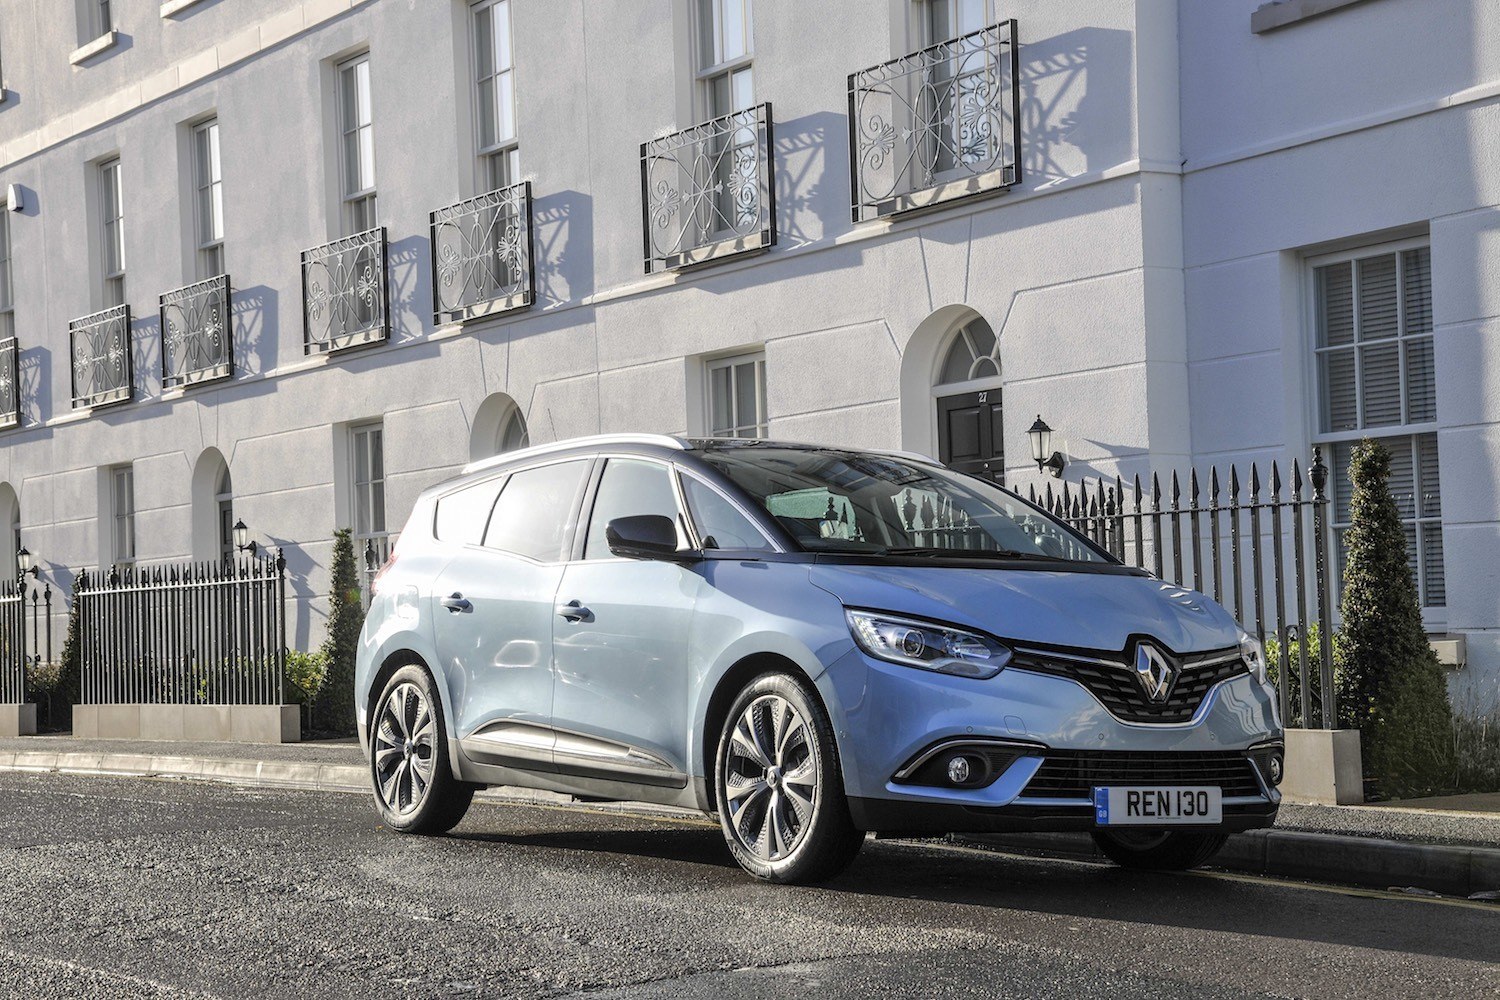 Neil Lyndon reviews the lates Renault Scenic for Drive 15